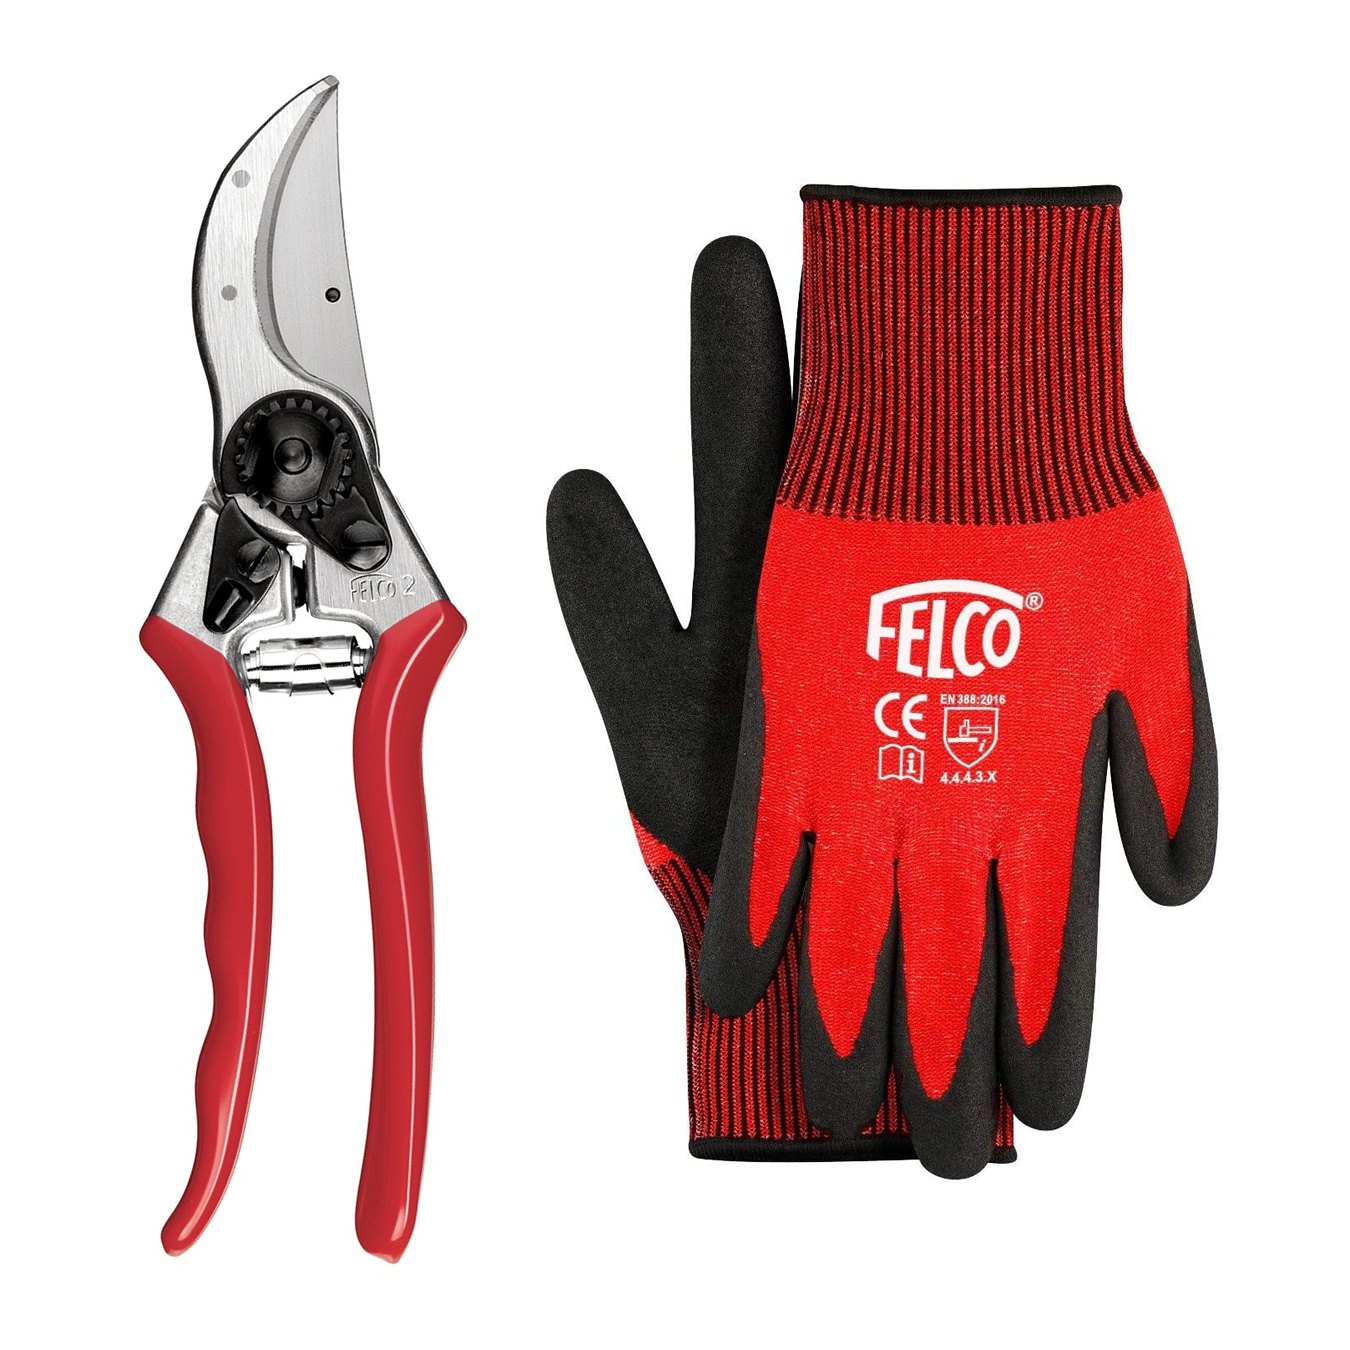 Felco Model 2 Secateurs with Large Gloves - Pruning shears - Genuine Felco - official Felco stockist